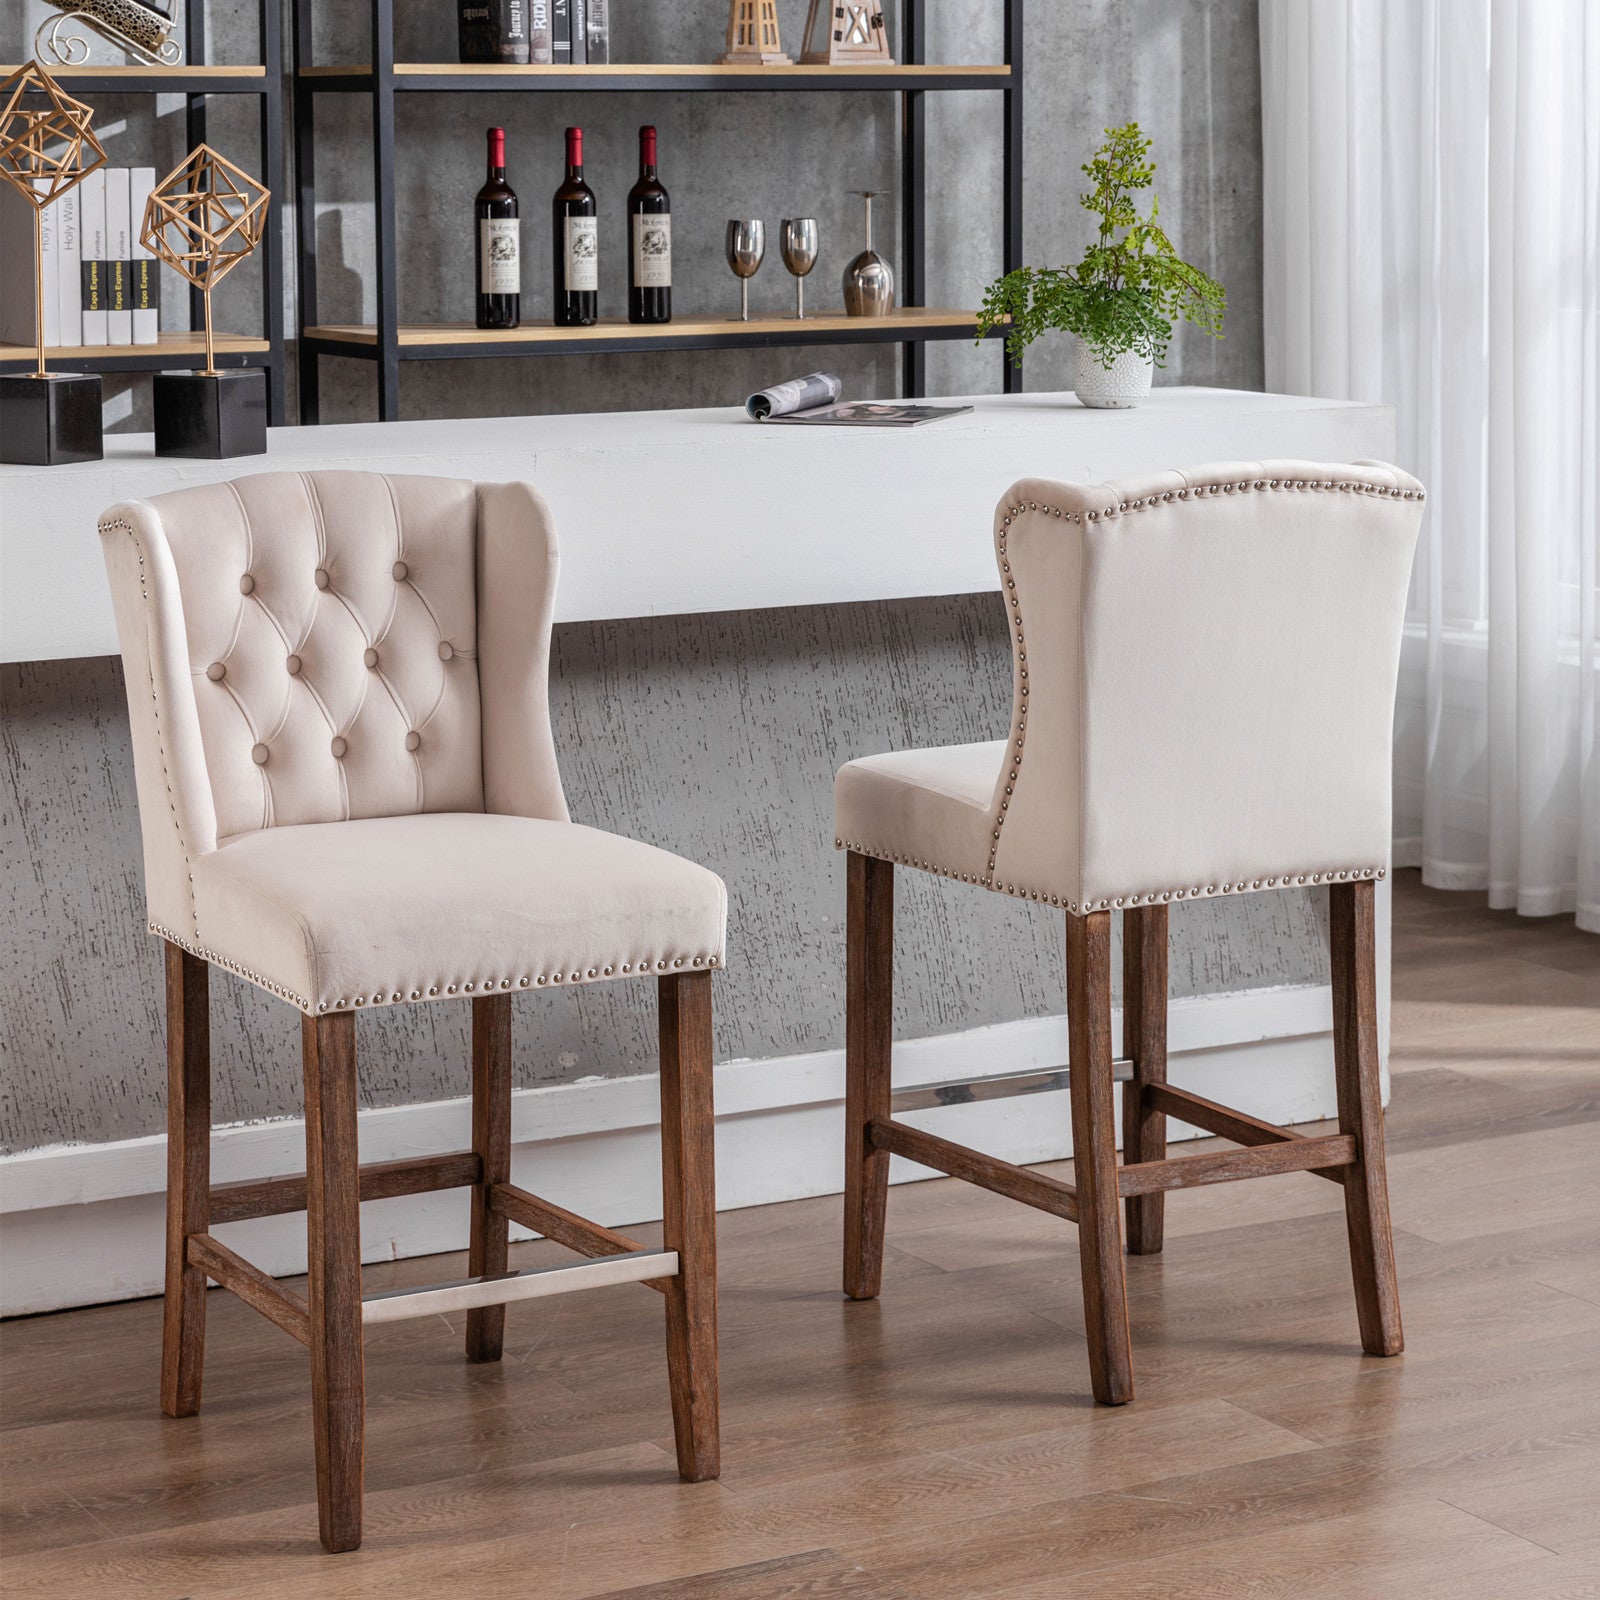 Set of 2 Beige Velvet Counter Stools with Tufted Back and Wingback